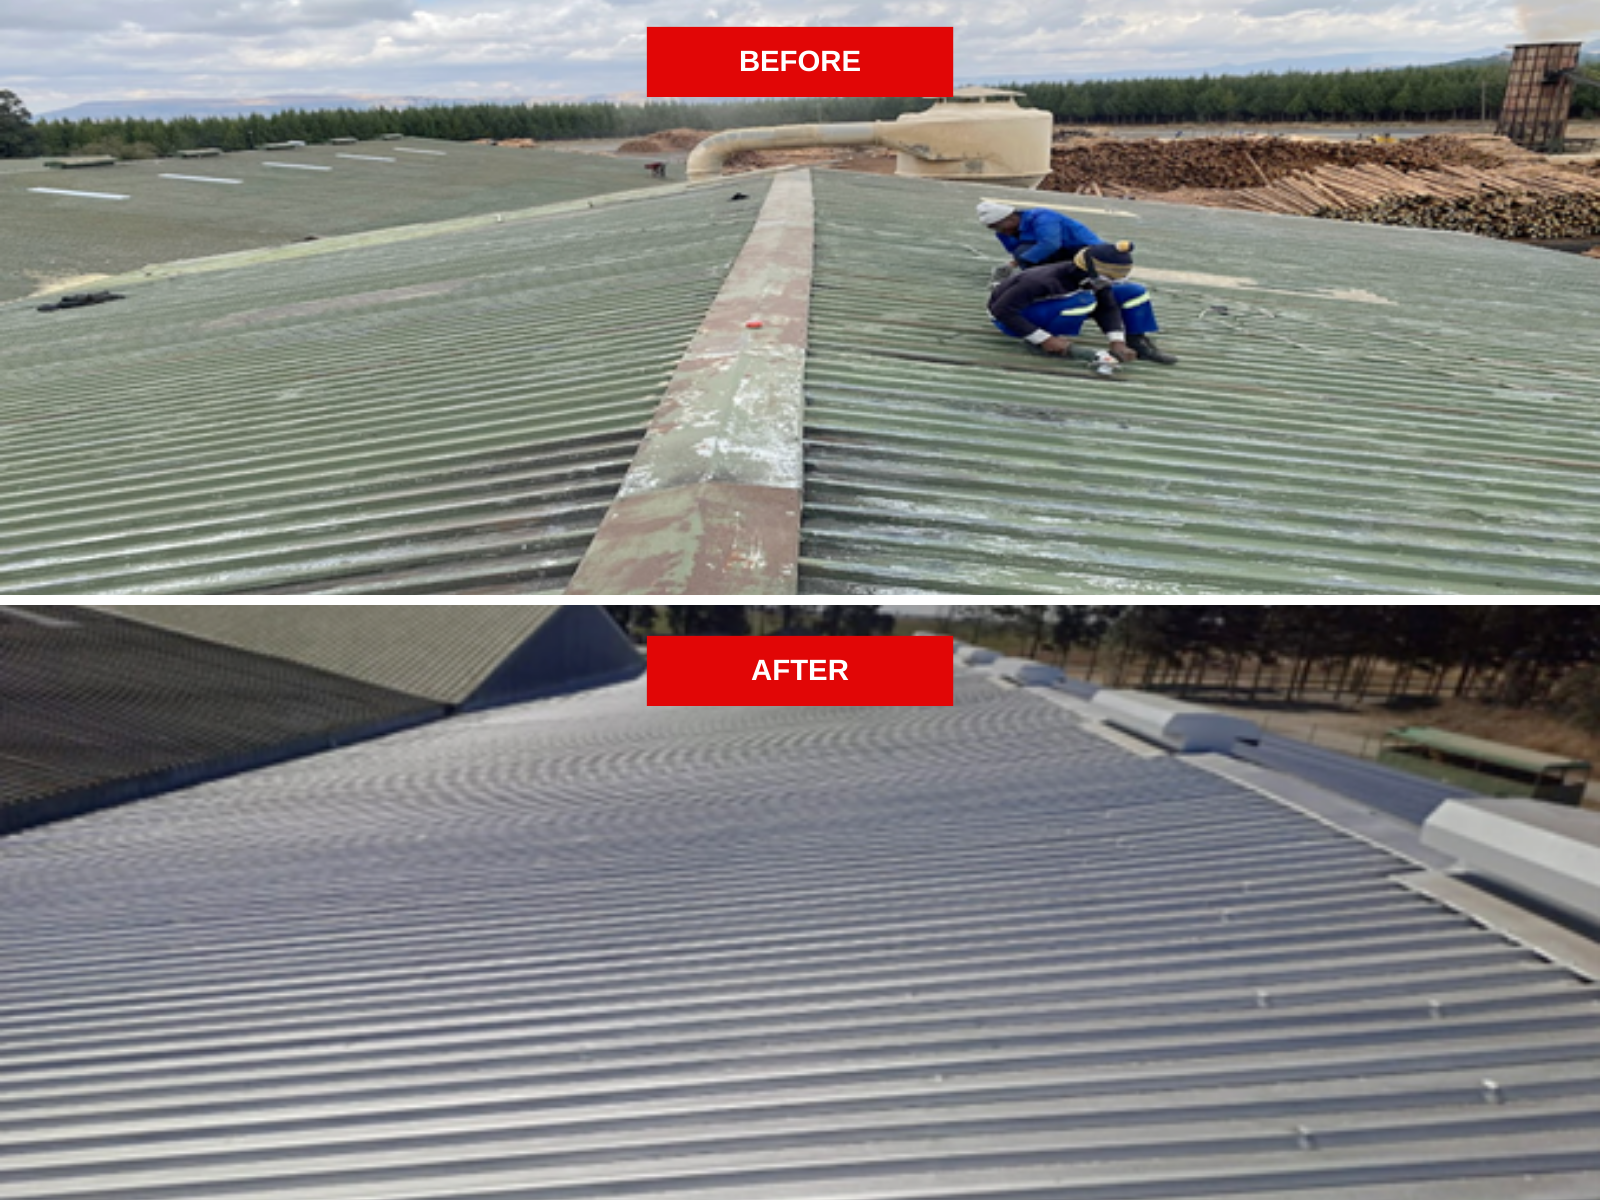 Normandien Sawmill, Newcastle, KZN - 3050m2 industrial roof painting project.